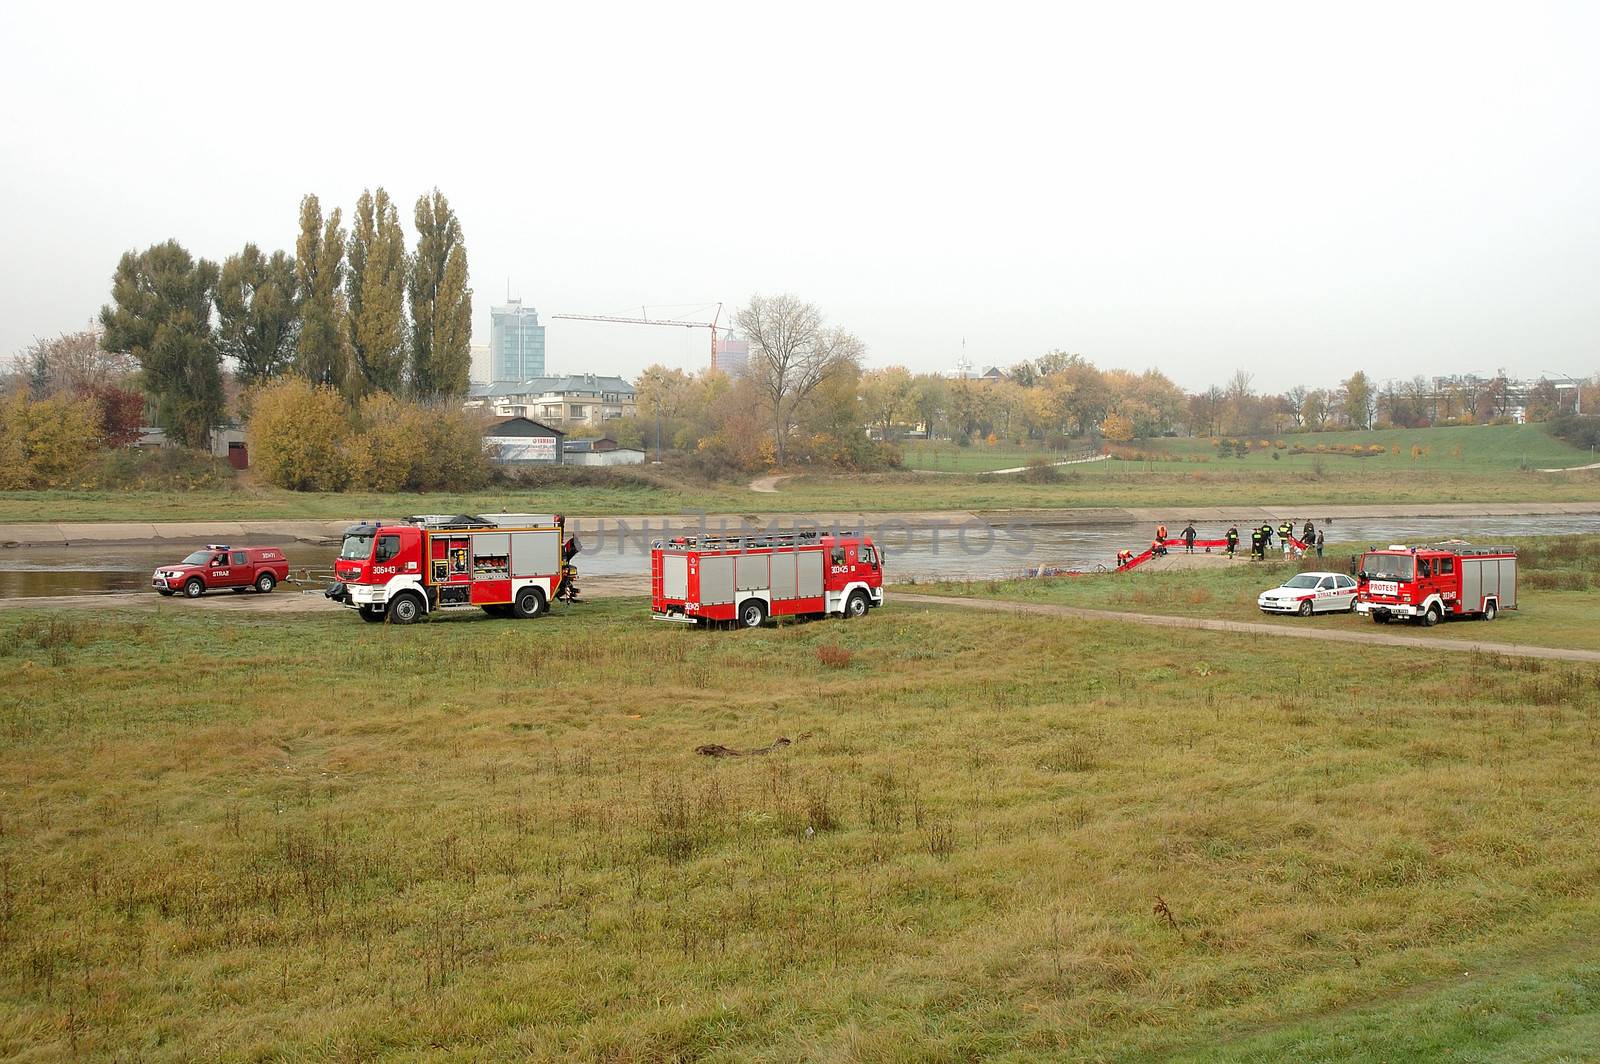 Fire brigade exercises on river bank by janhetman